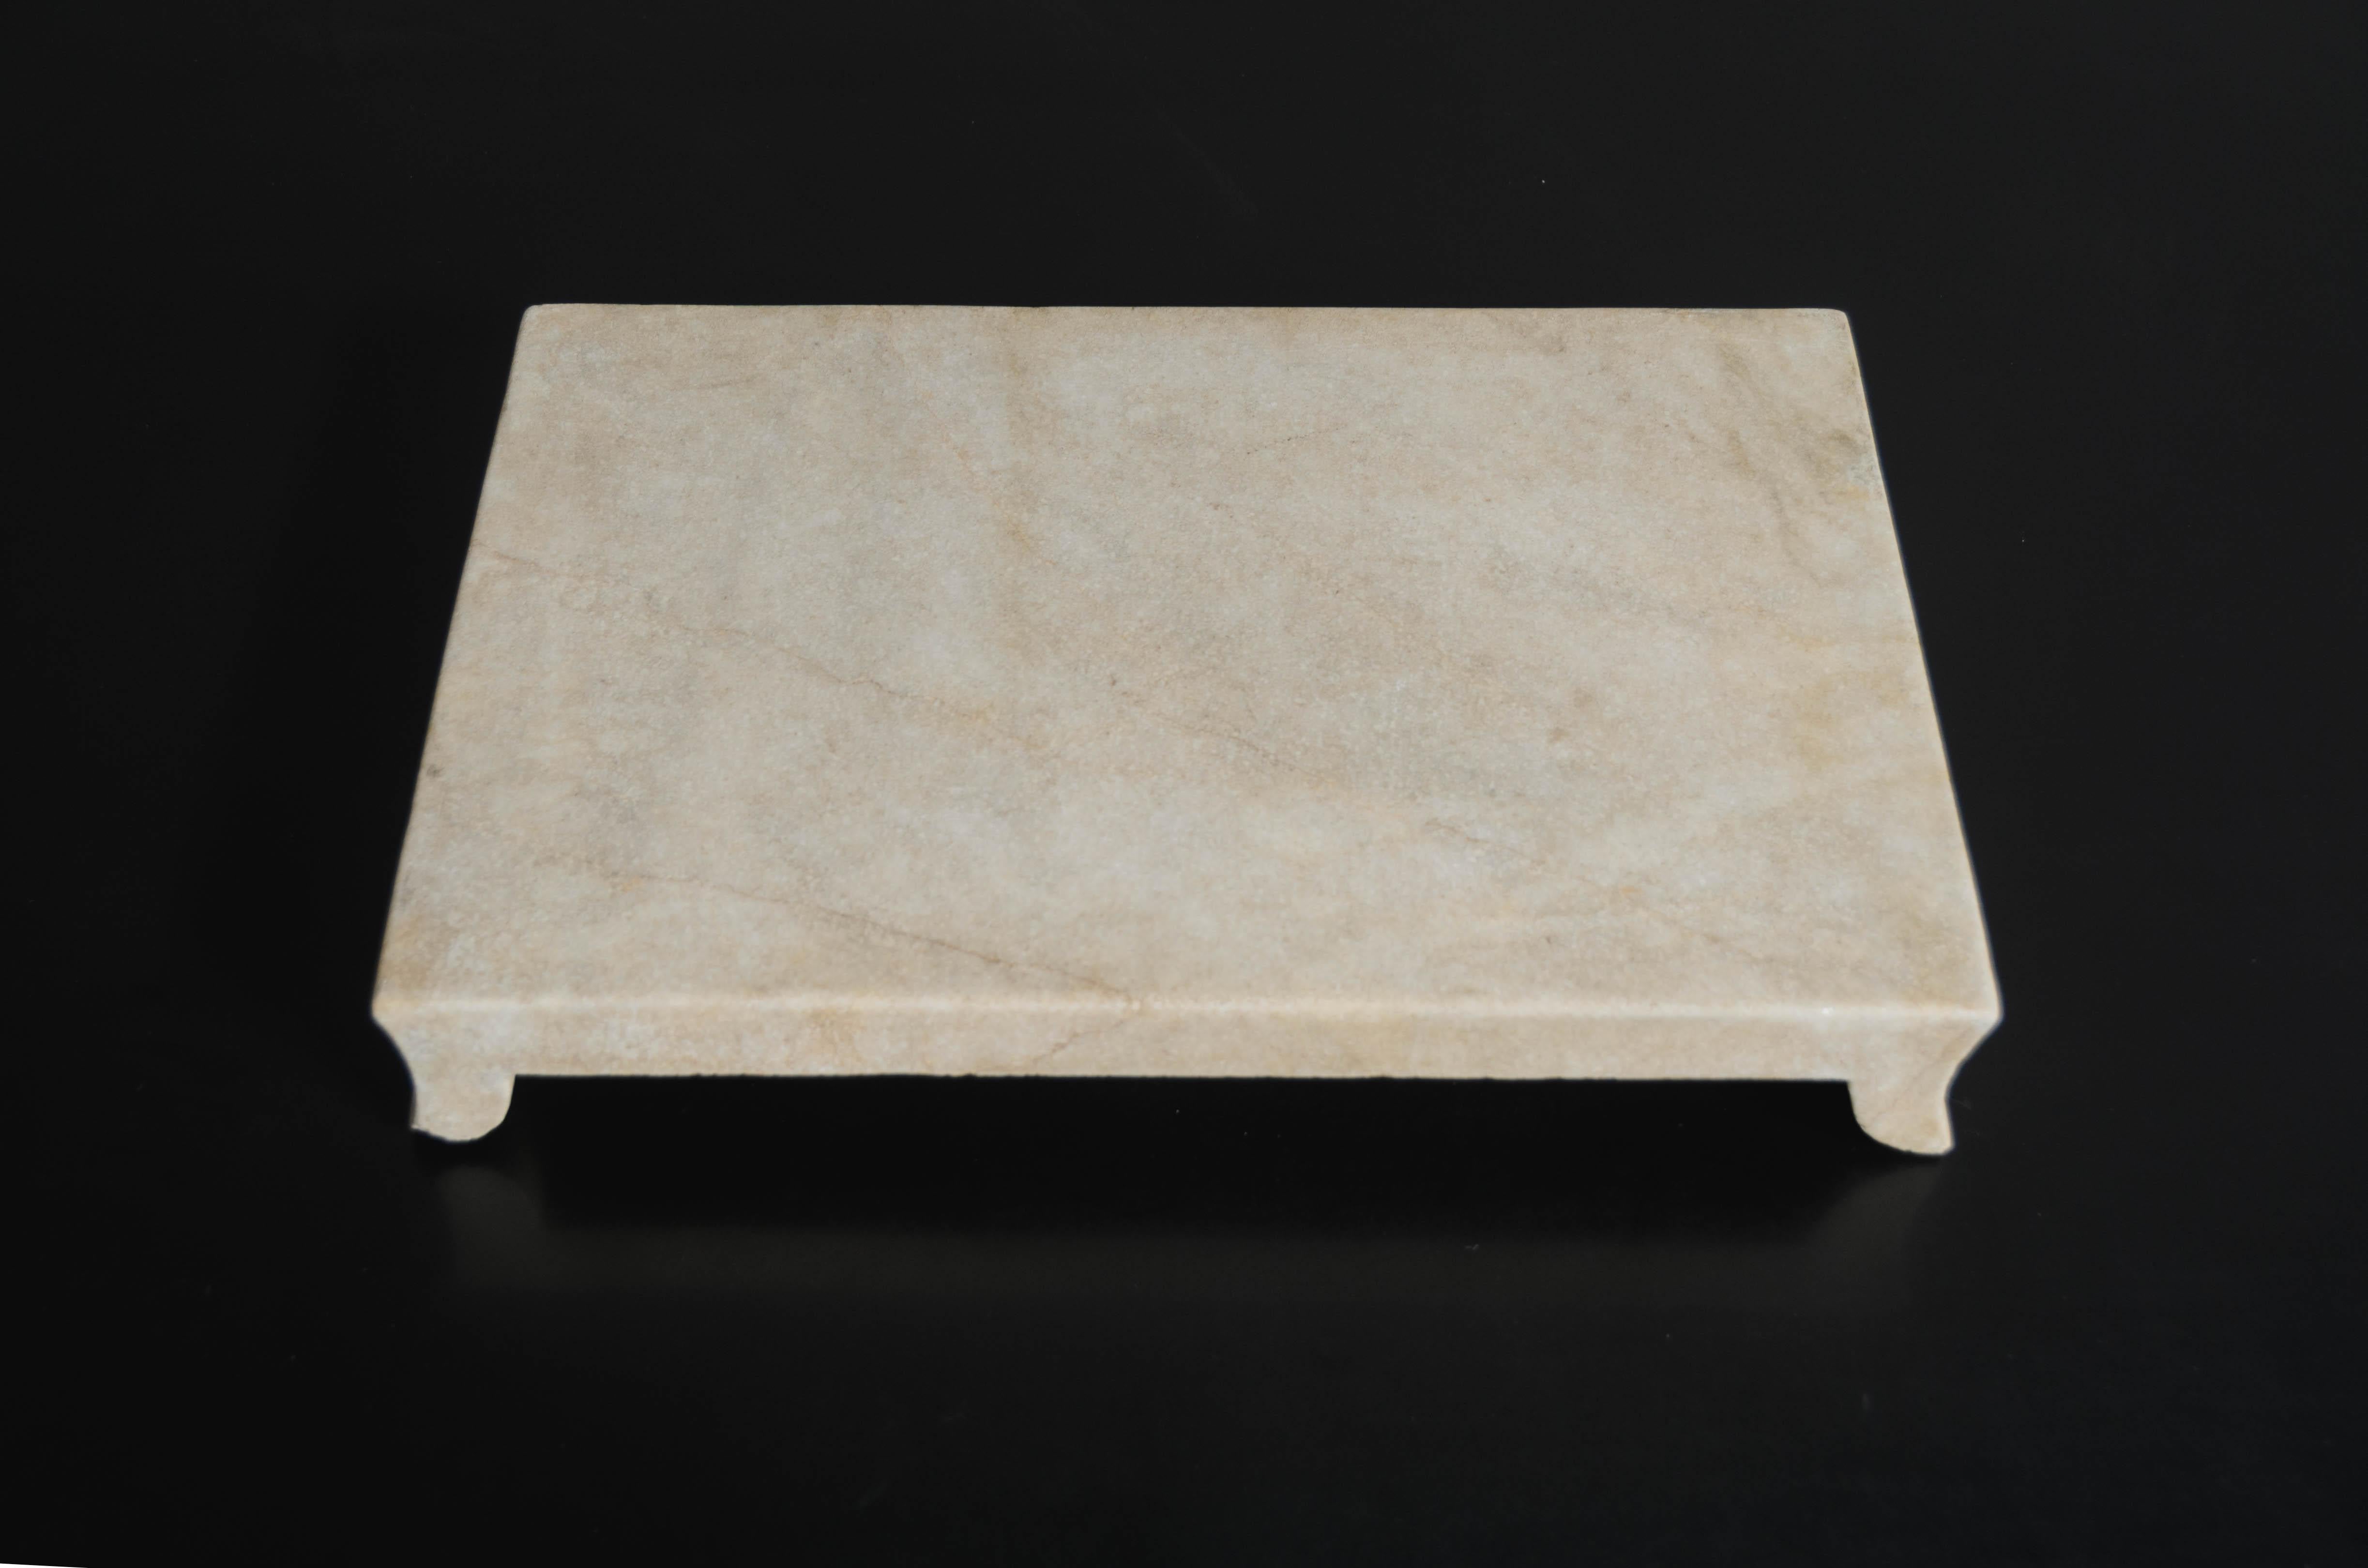 Stone elevated tray
Han Bai Yu stone (White Marble)
Hand carved
Limited edition
Each individual stone vary in inclusions and color. Each piece is individually crafted and is unique.
  